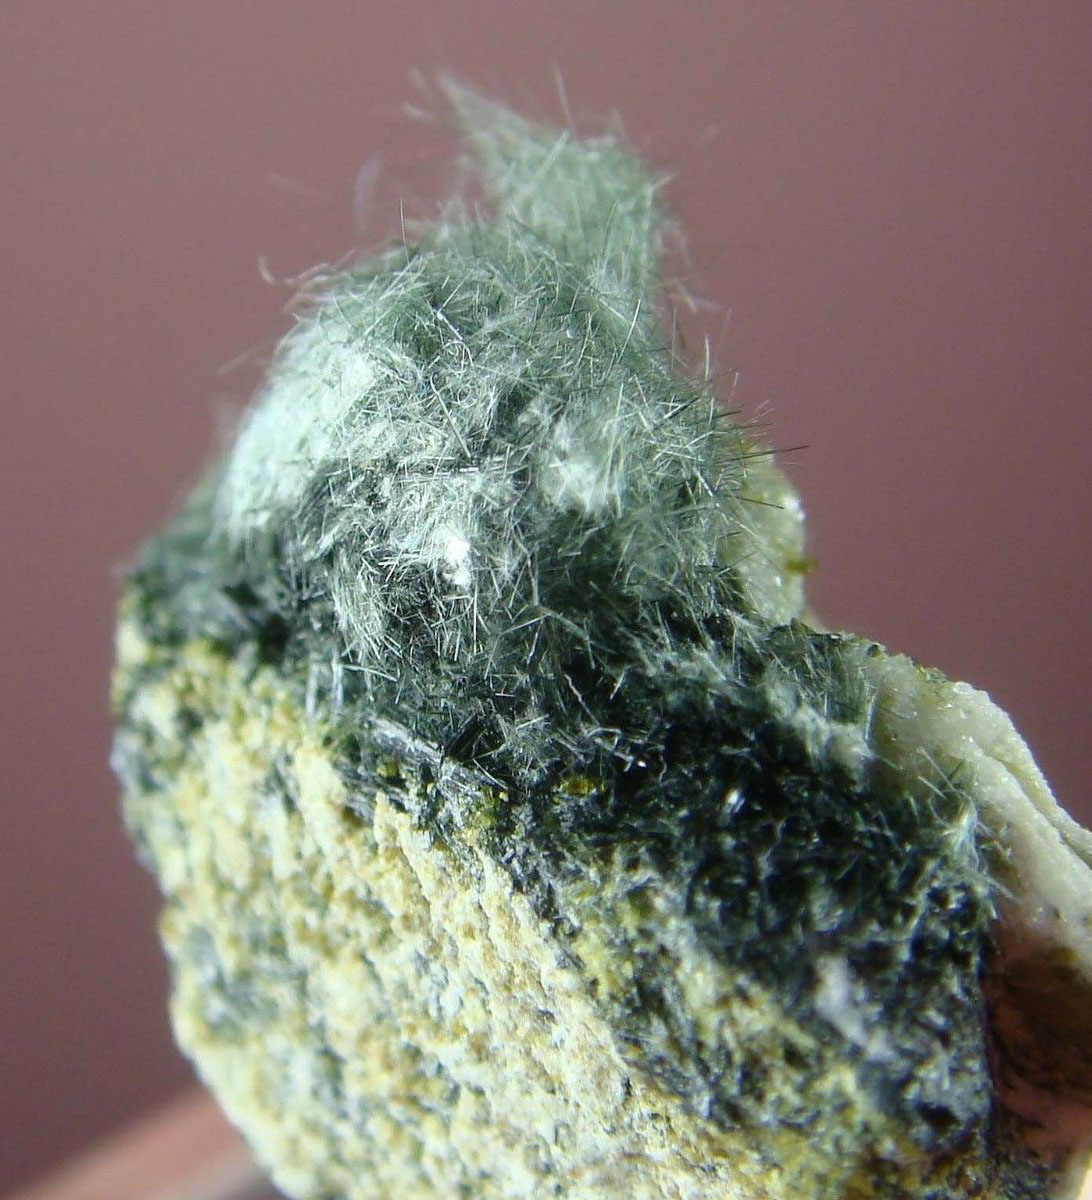 Byssolite With Epidote